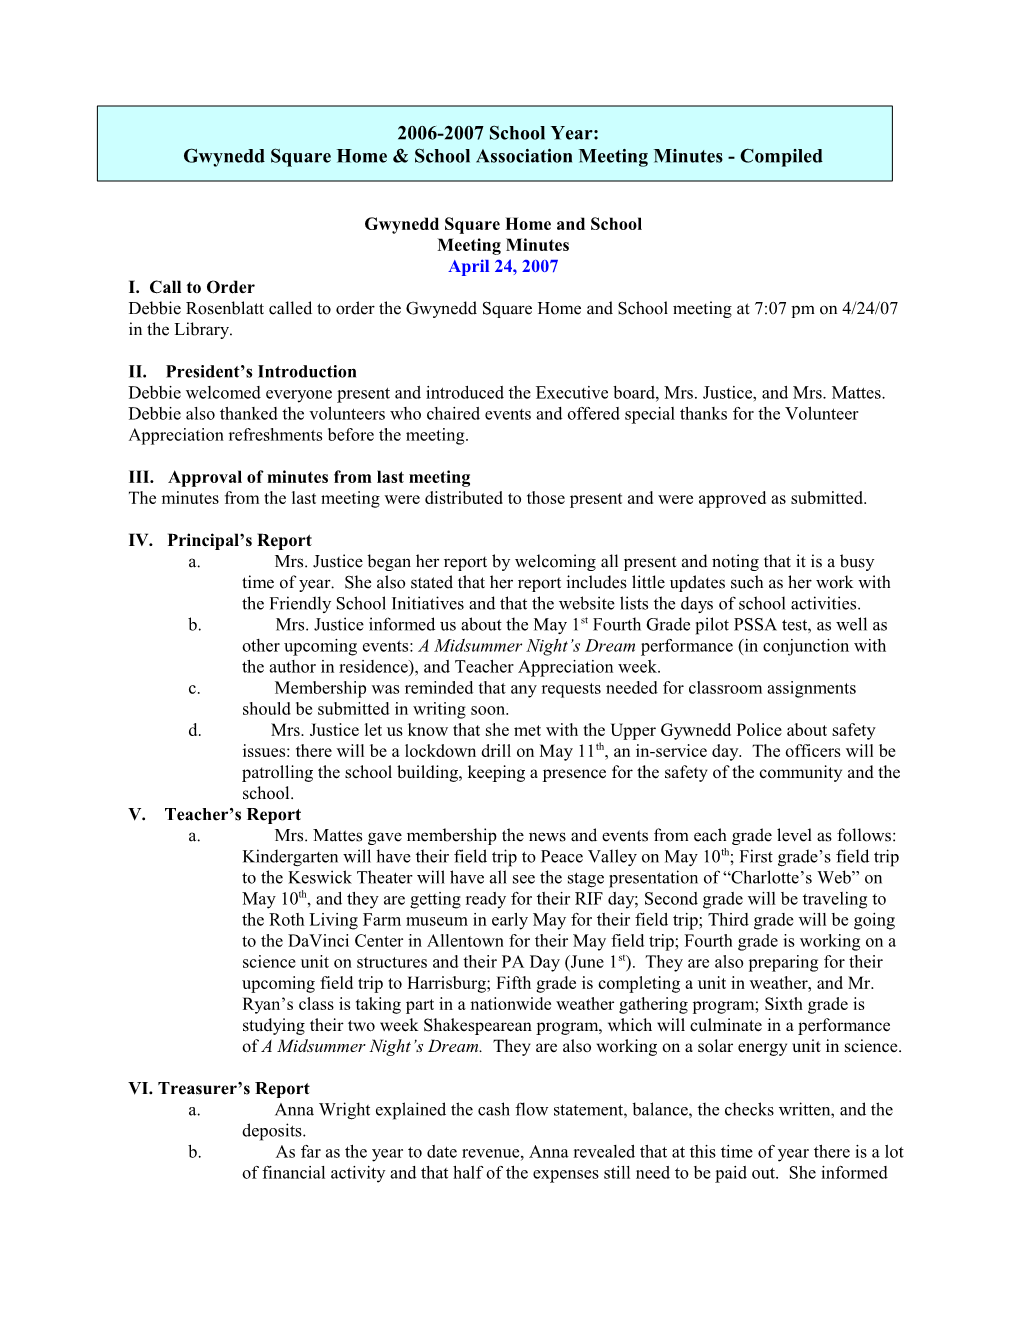 2006-2007 Archived Gwynedd Square Home & School Association Meeting Minutes